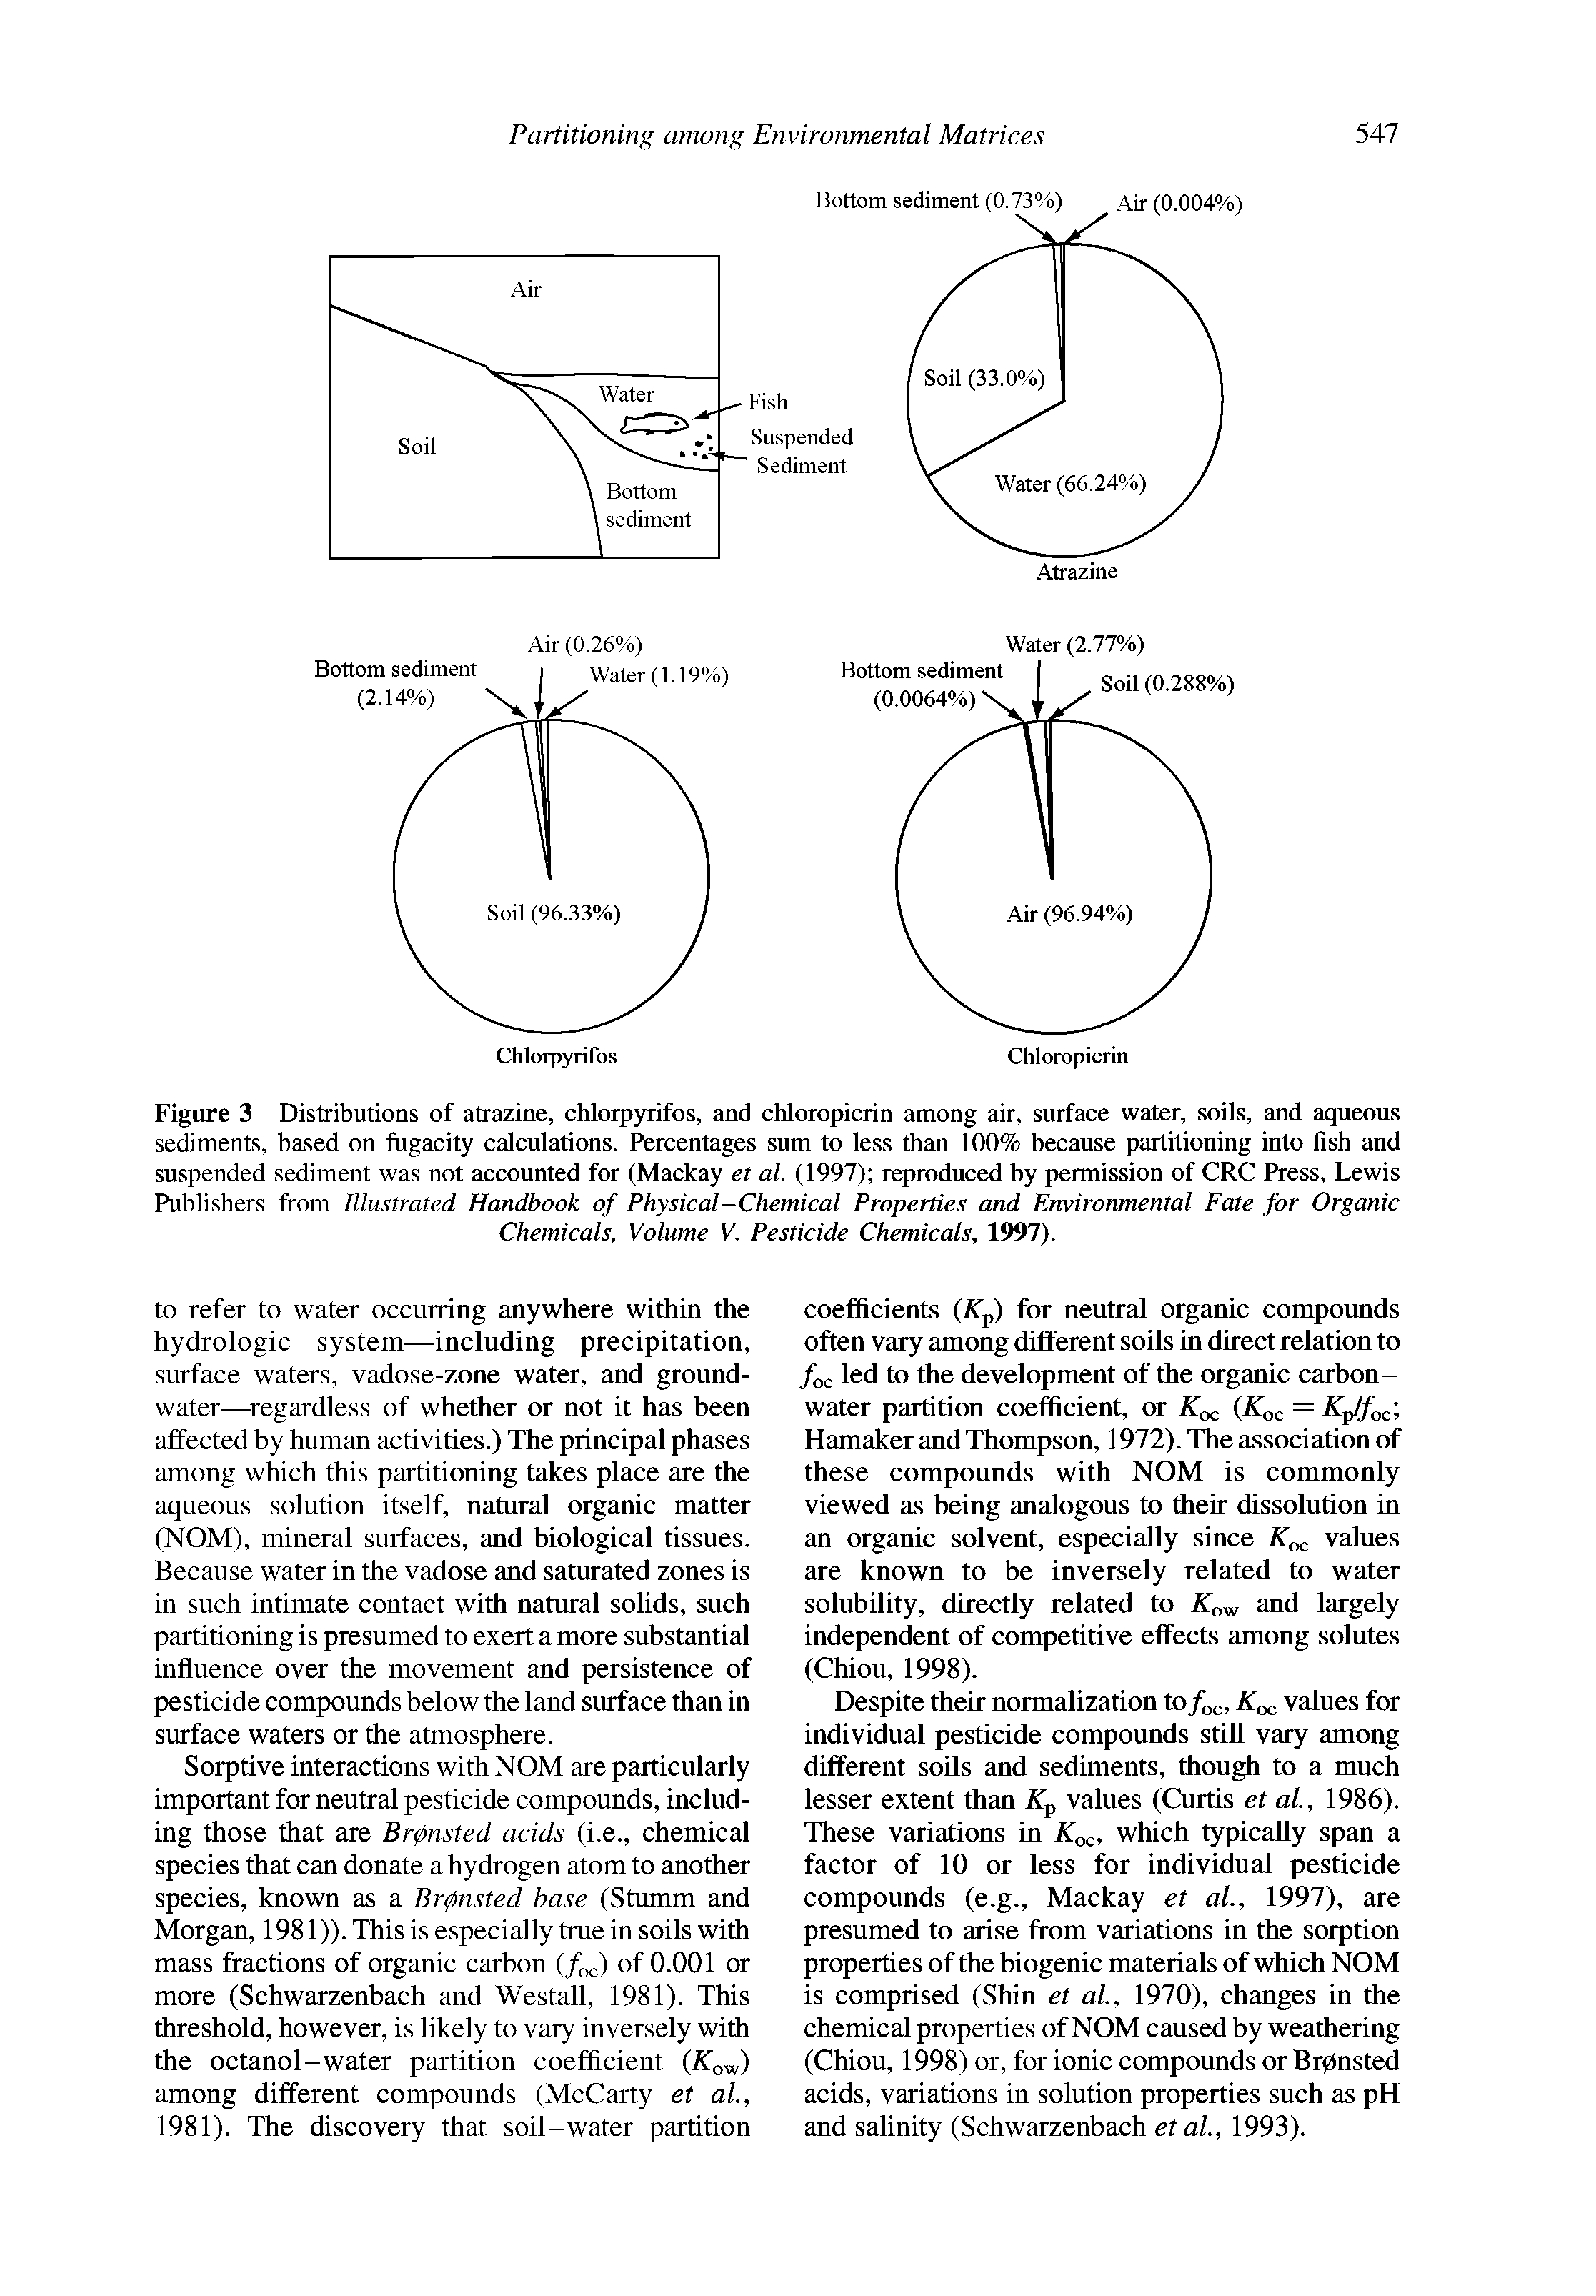 Figure 3 Distributions of atrazine, chlorpyrifos, and chloropicrin among air, surface water, soils, and aqueous sediments, based on fugacity calculations. Percentages sum to less than 100% because partitioning into fish and suspended sediment was not accounted for (Mackay et al. (1997) reproduced hy permission of CRC Press, Lewis Publishers from Illustrated Handbook of Physical-Chemical Properties and Environmental Fate for Organic...